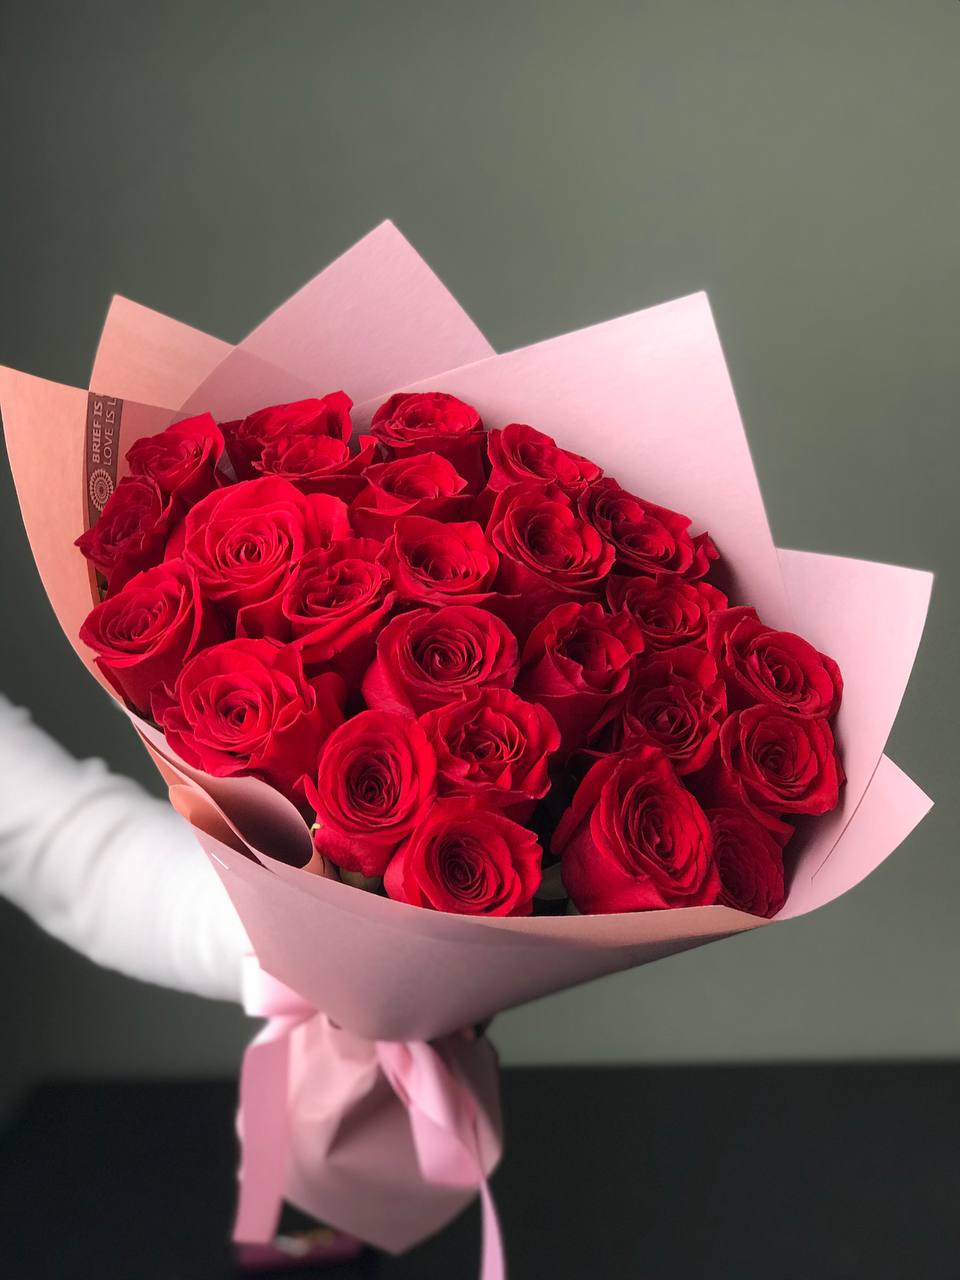 21 Roses (color to the florist's taste)